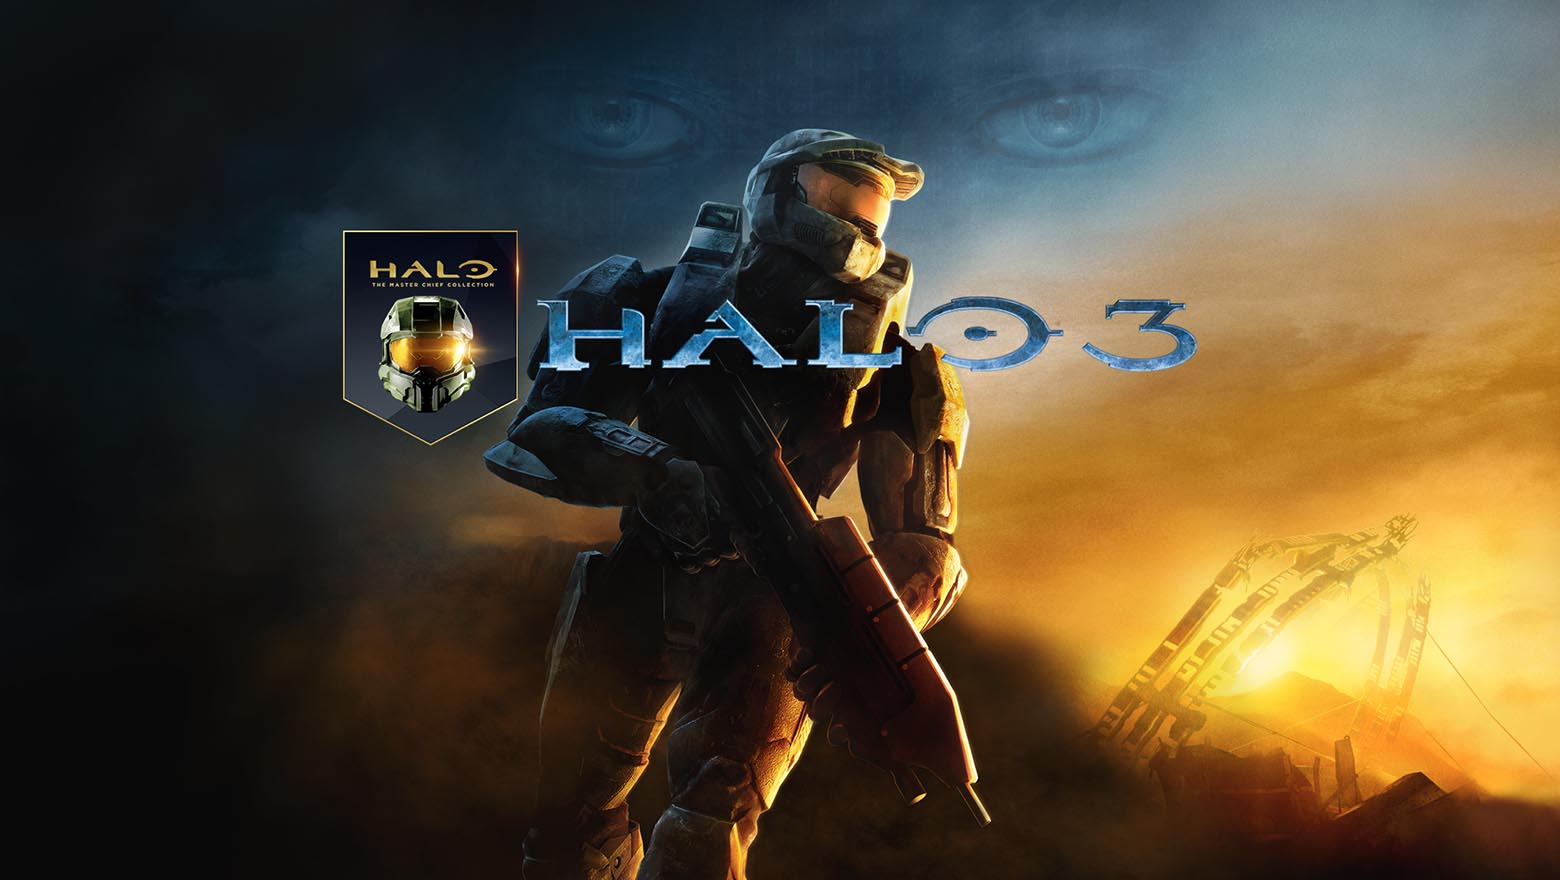 Halo 3 now available for PC